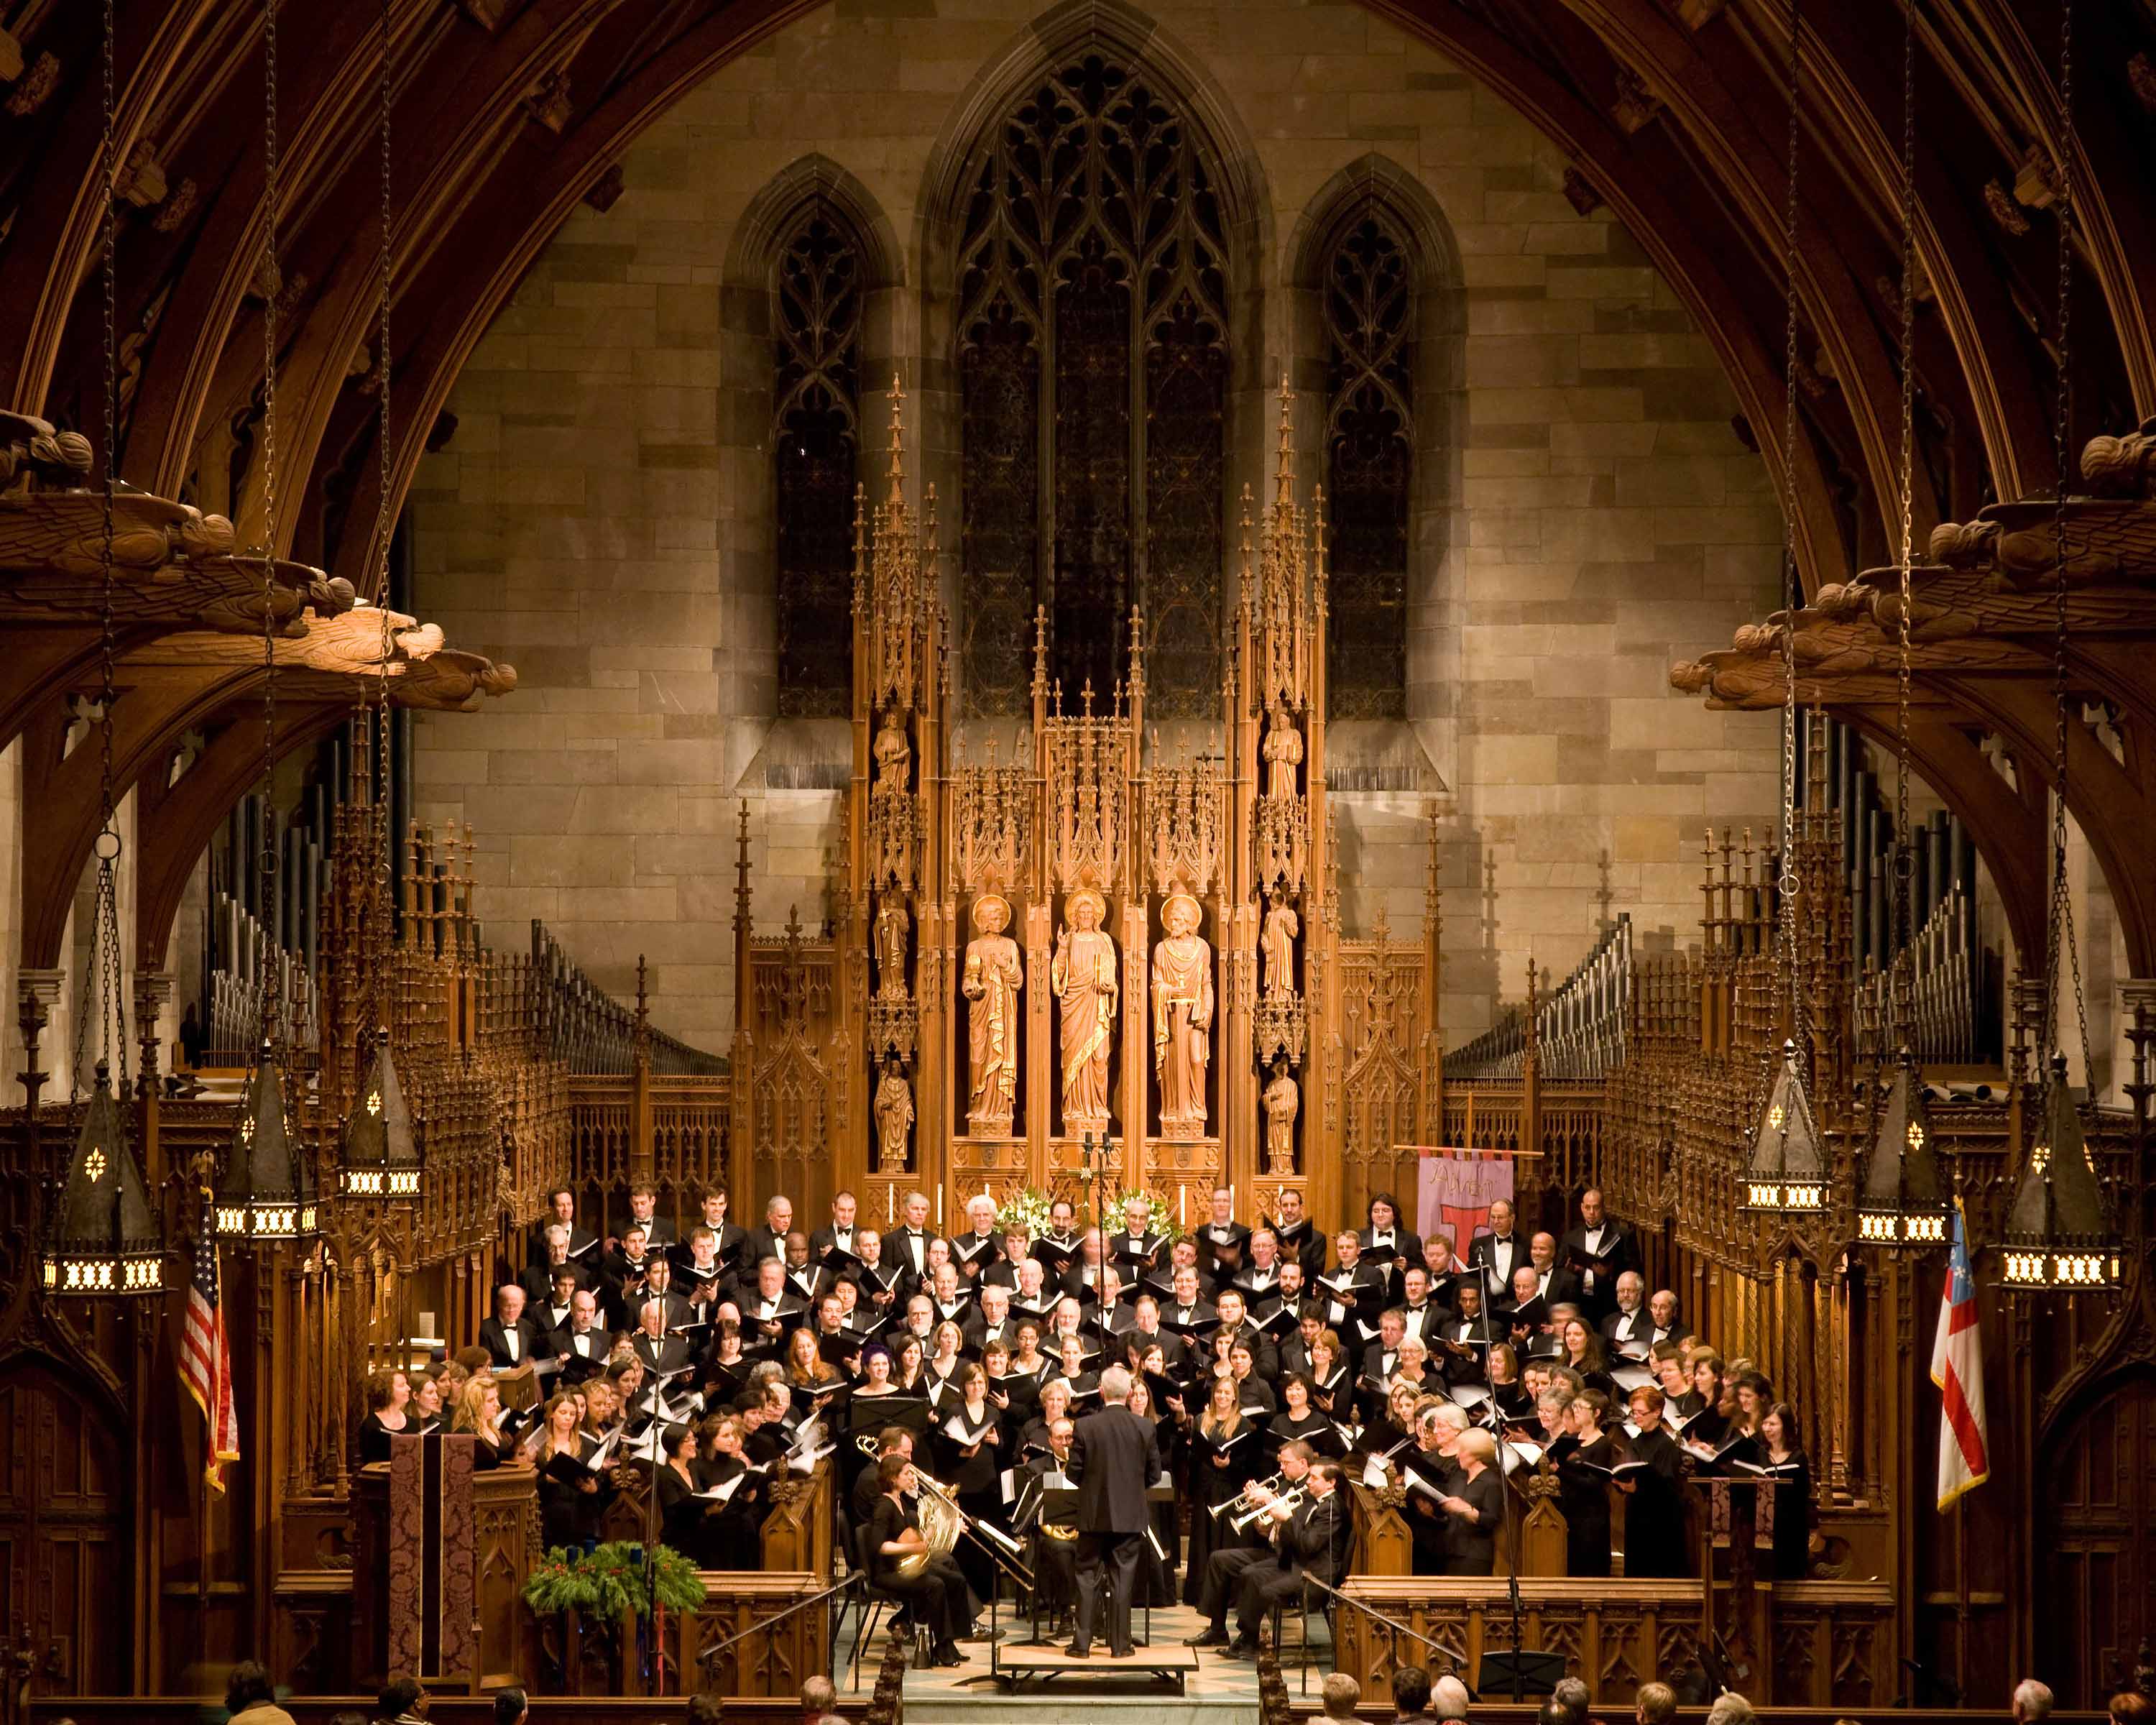 A Feast Of Carols Holiday Concert at St. Paul’s Episcopal